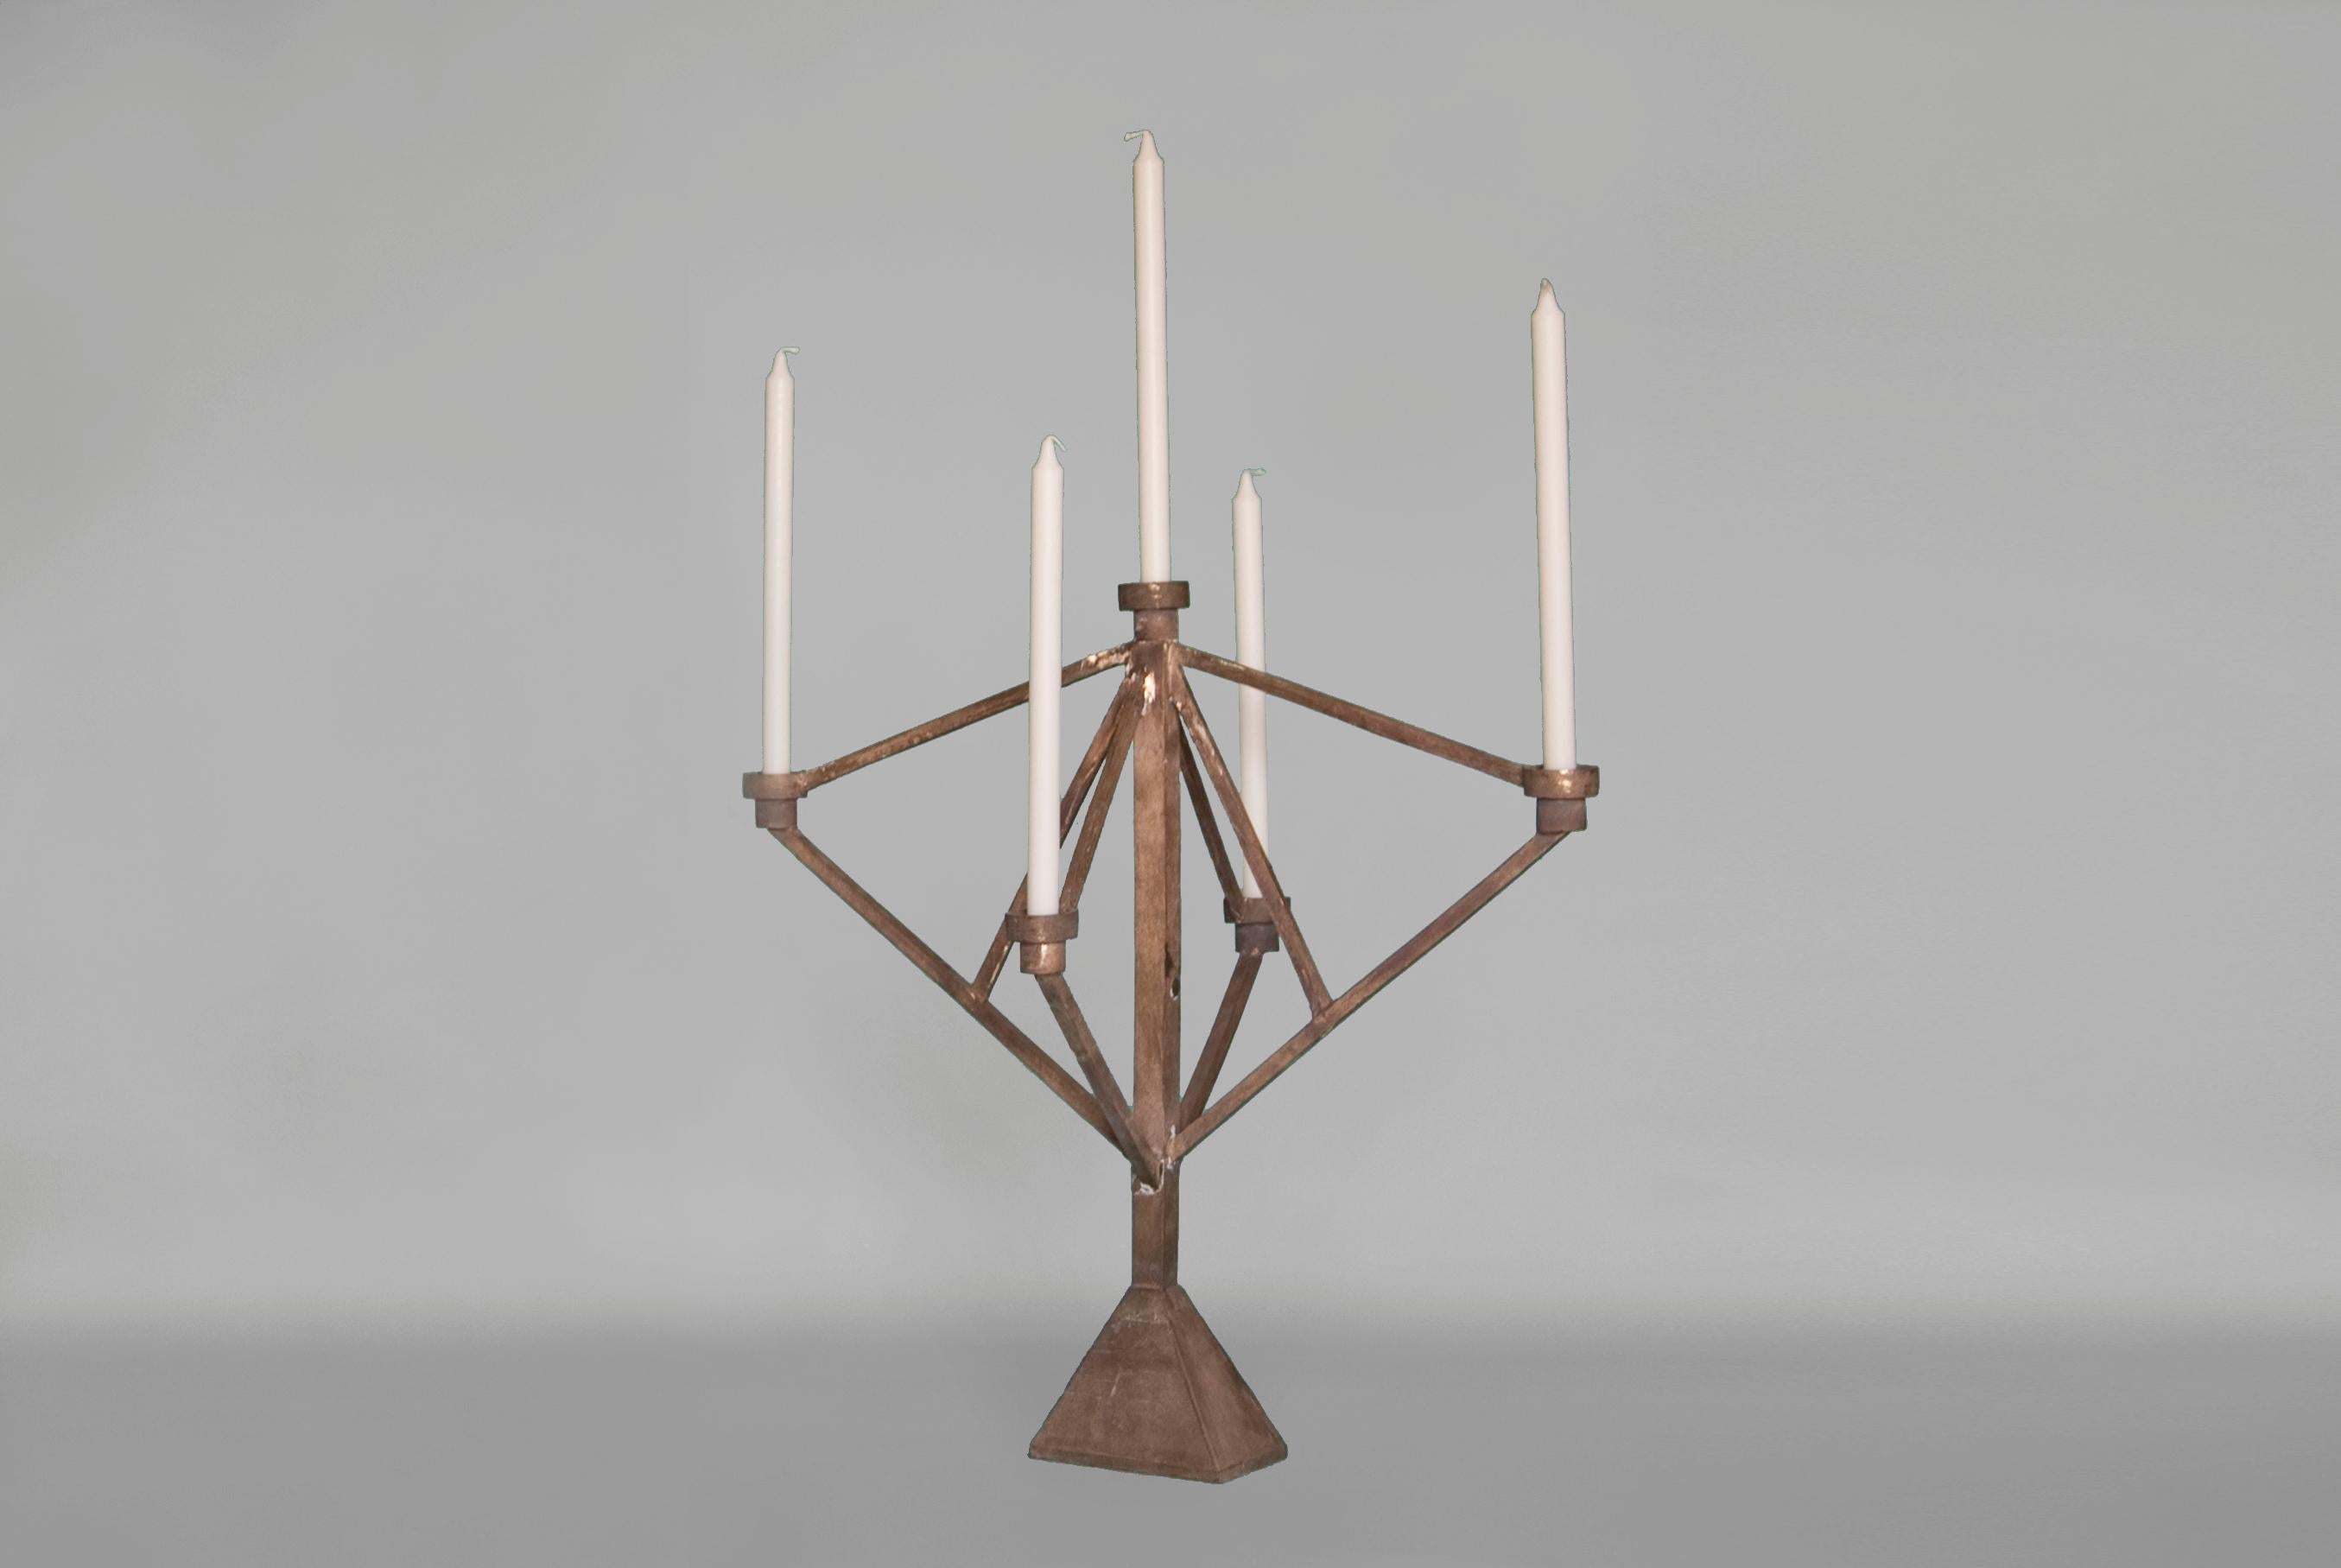 The Sprue candelabra is cast bronze with two-five candleholders depending on the size. The textures within the wax during the casting process translate perfectly into the bronze material, so the castings are left intentionally raw, allowing the